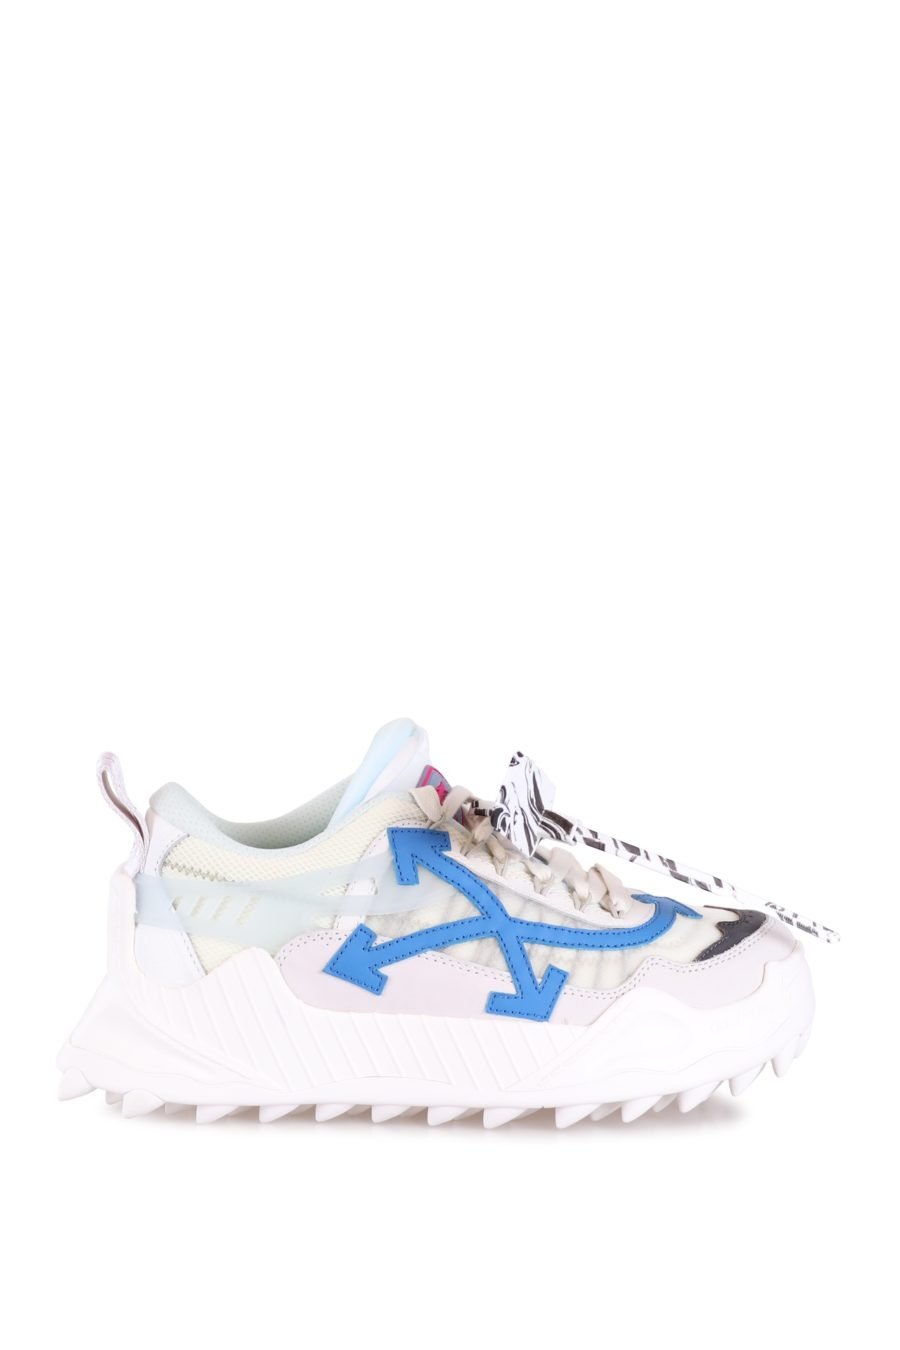 Chaussures Off-White "ODSY-1000" blanches avec flèches bleues - ccb5215e5ba2d8a6f17ed72936af7b948e6b713f